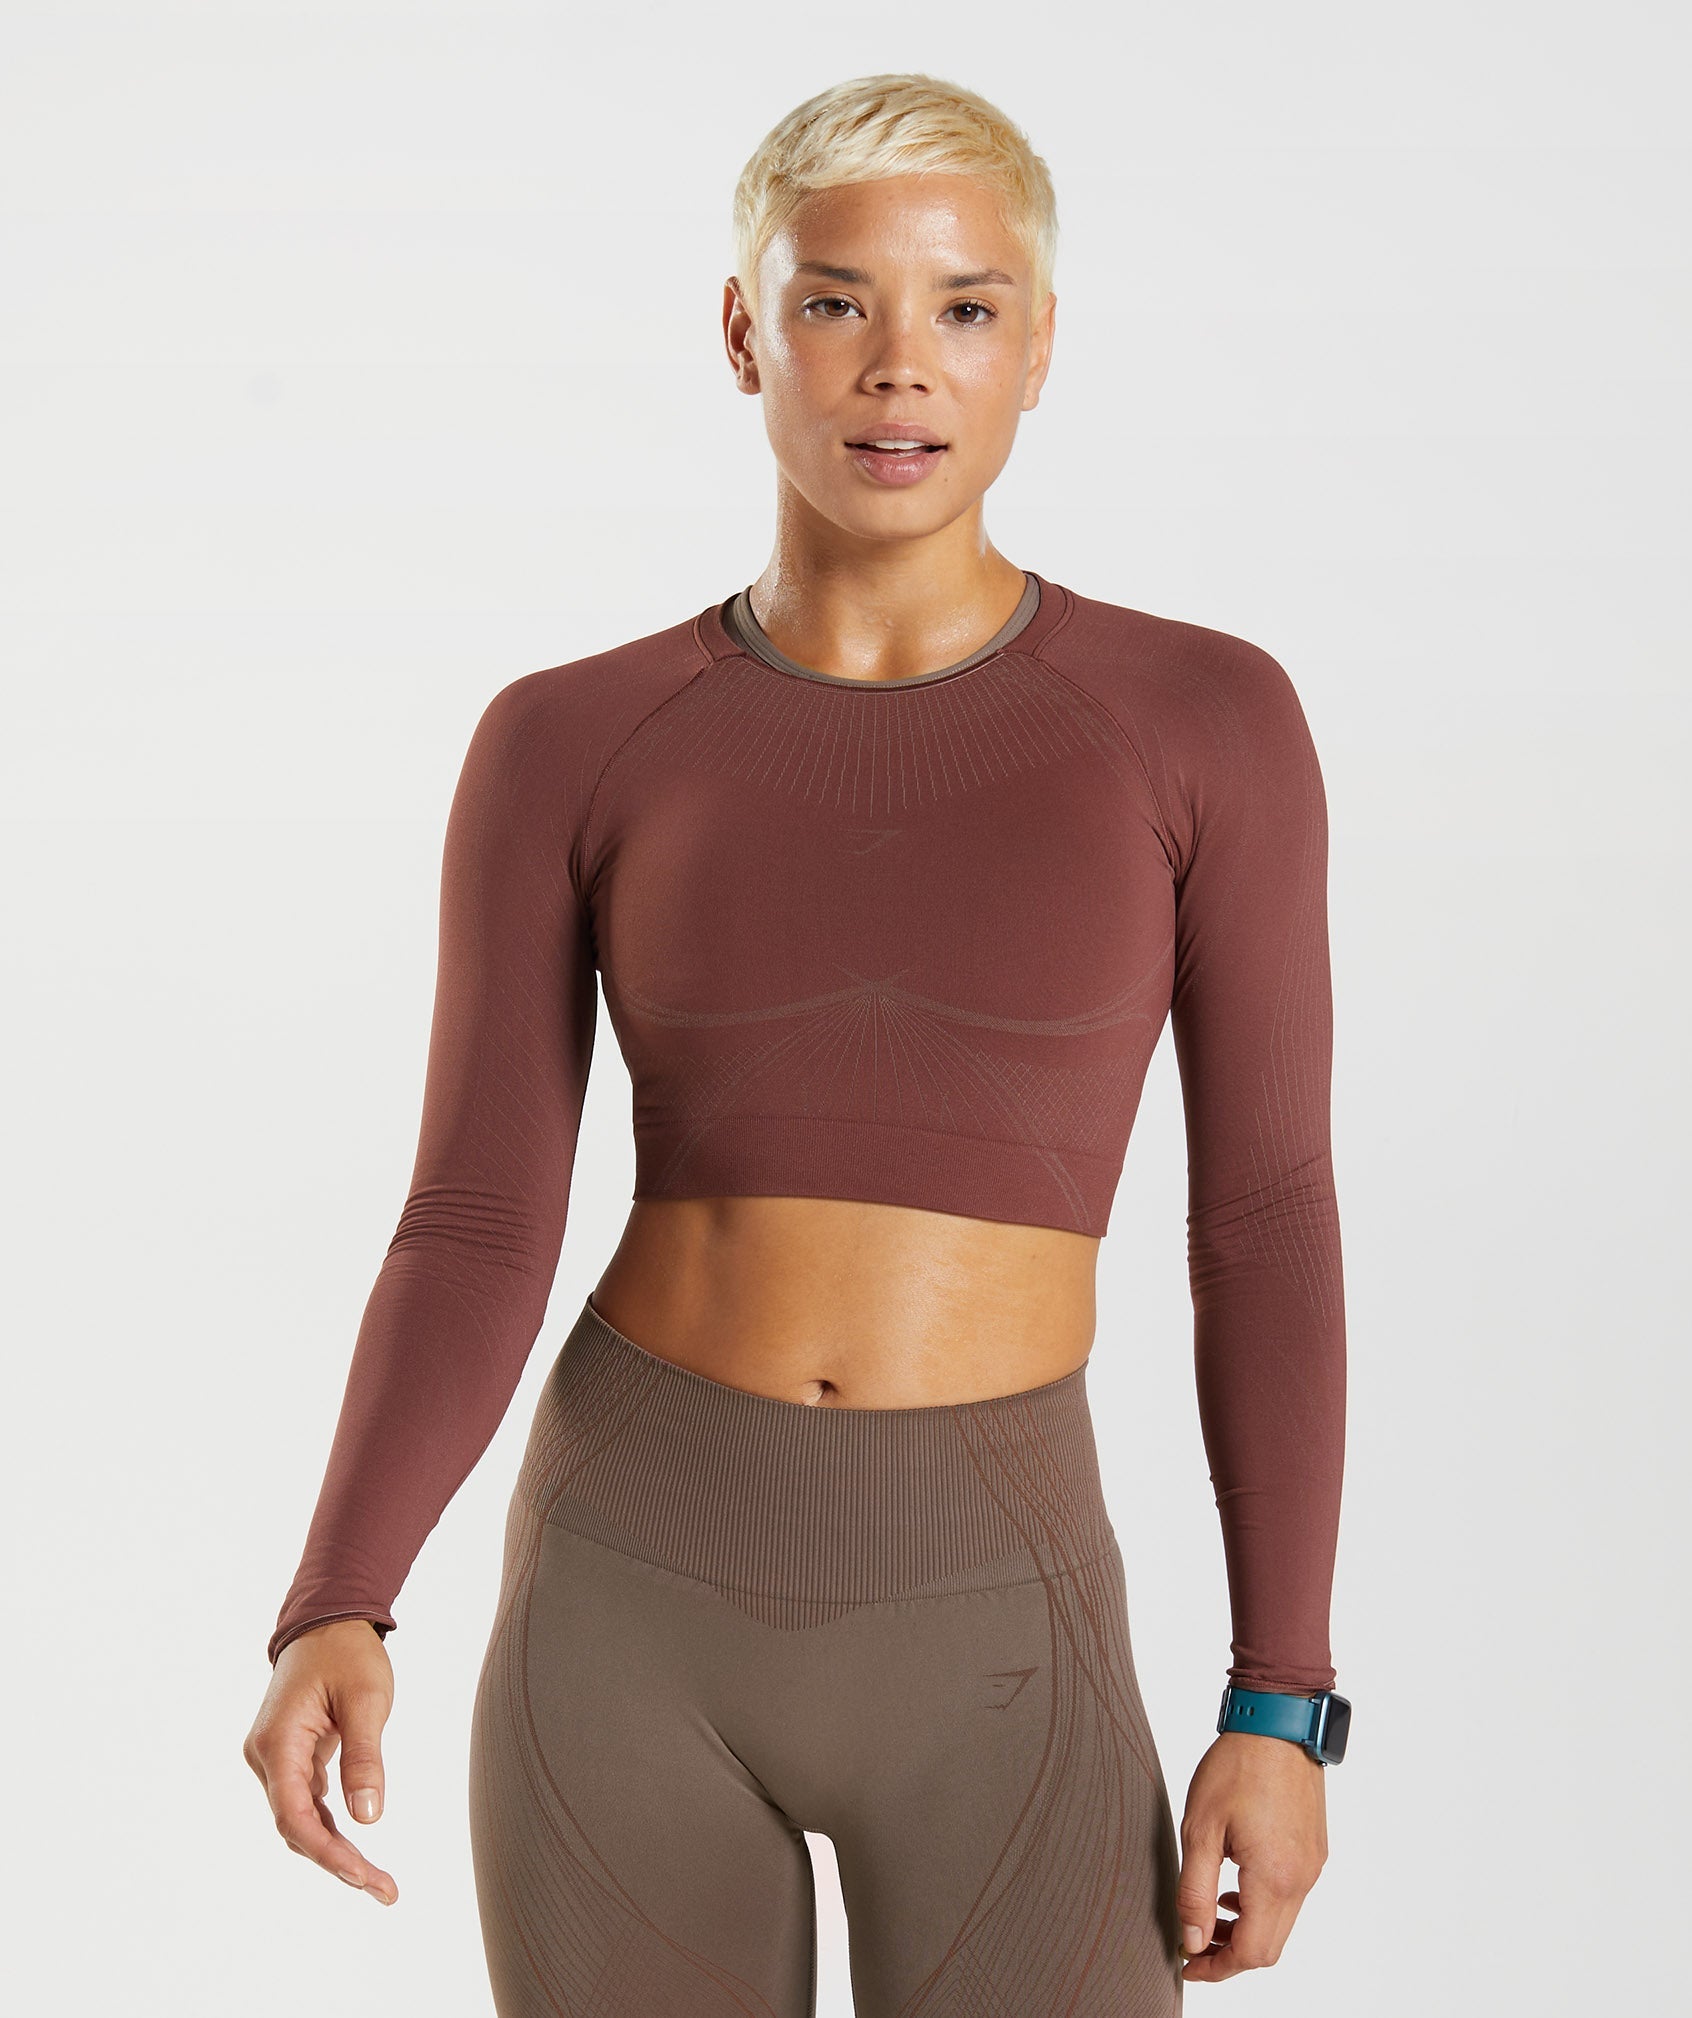 Apex Seamless Crop Top in Cherry Brown/Truffle Brown - view 1